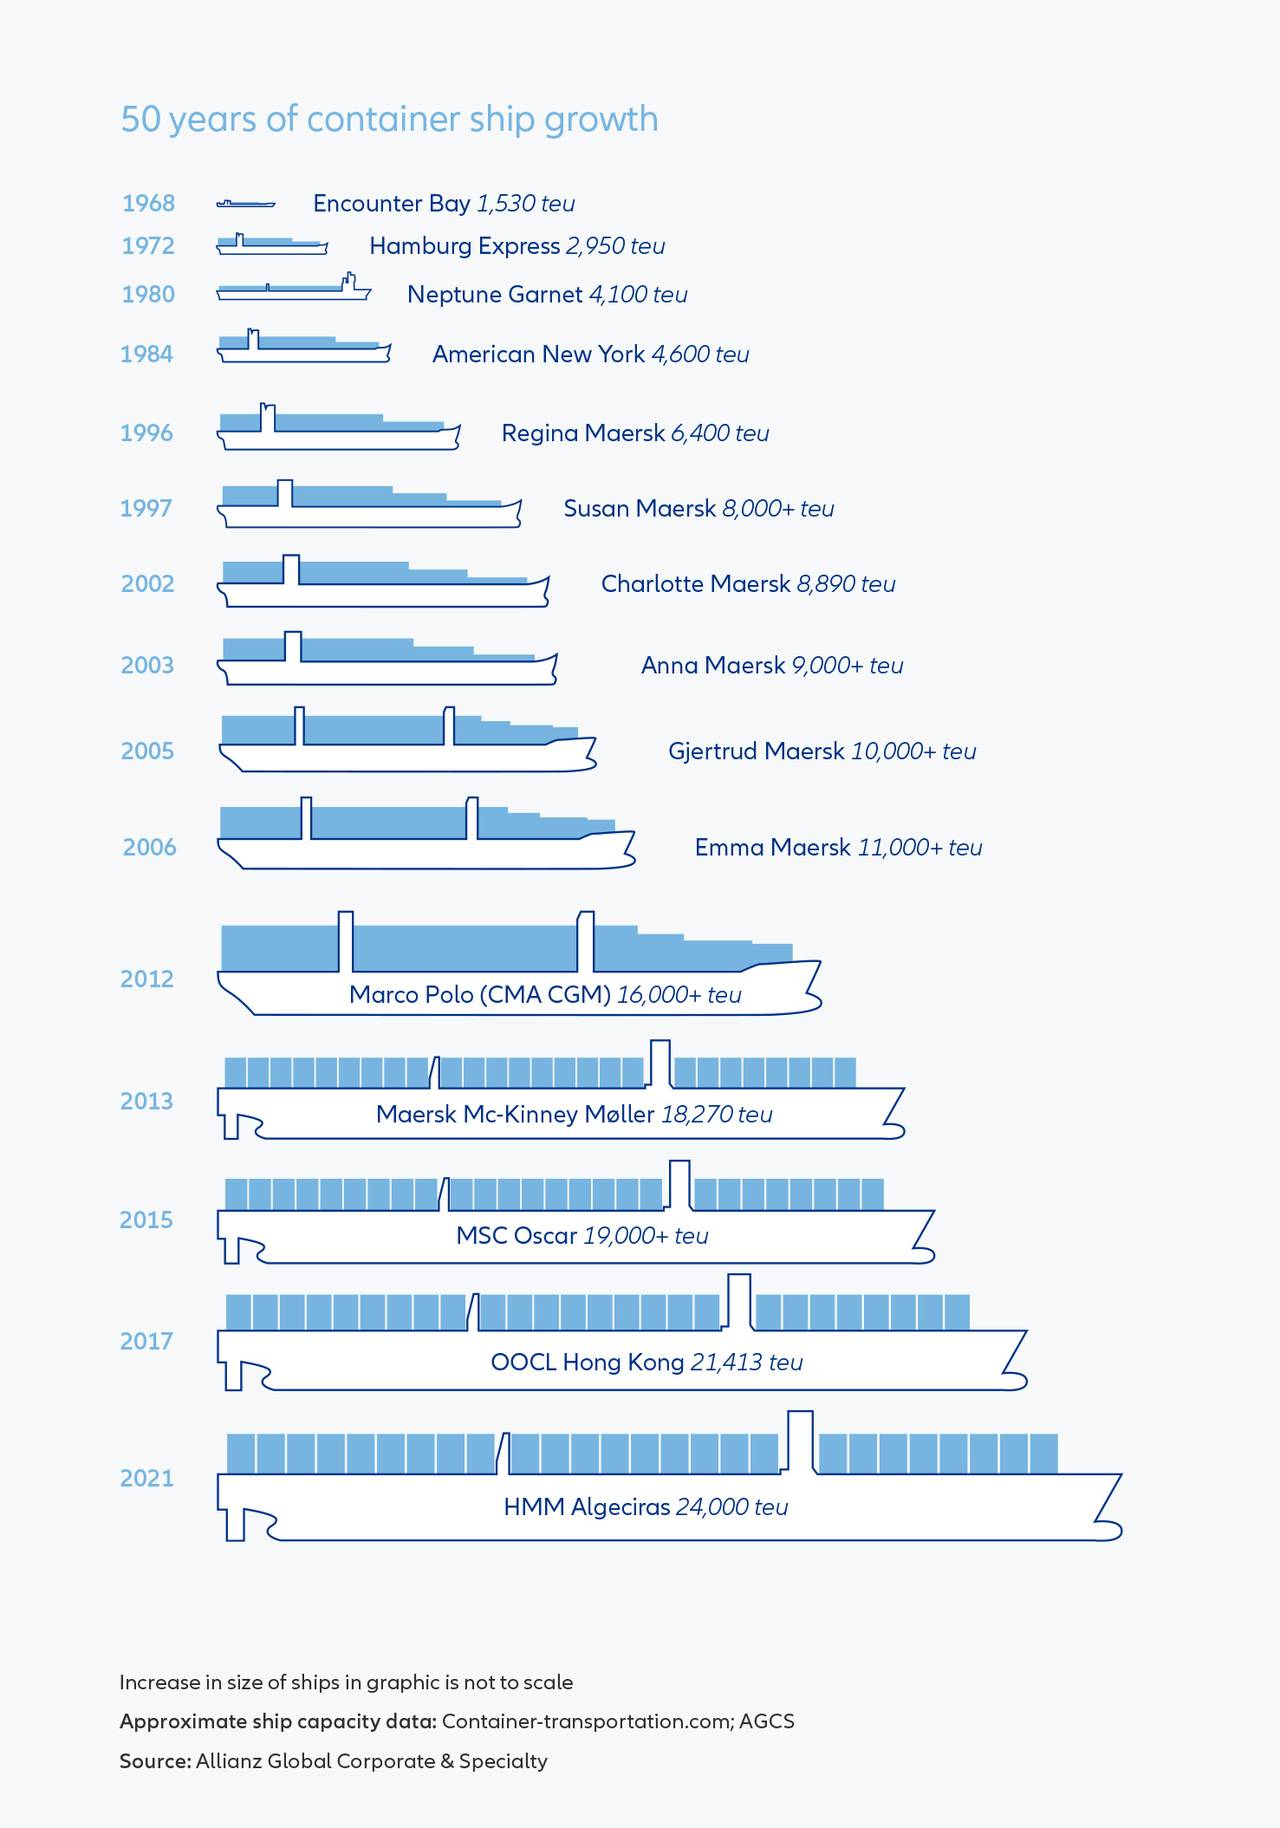 Container ships have exploded in size in the last 20 years. TEUs, or twenty-foot equivalent units, are the standard measurement for the carrying capacity of cargo ships. 

Courtesy of Allianz Global Corporate & Specialty.